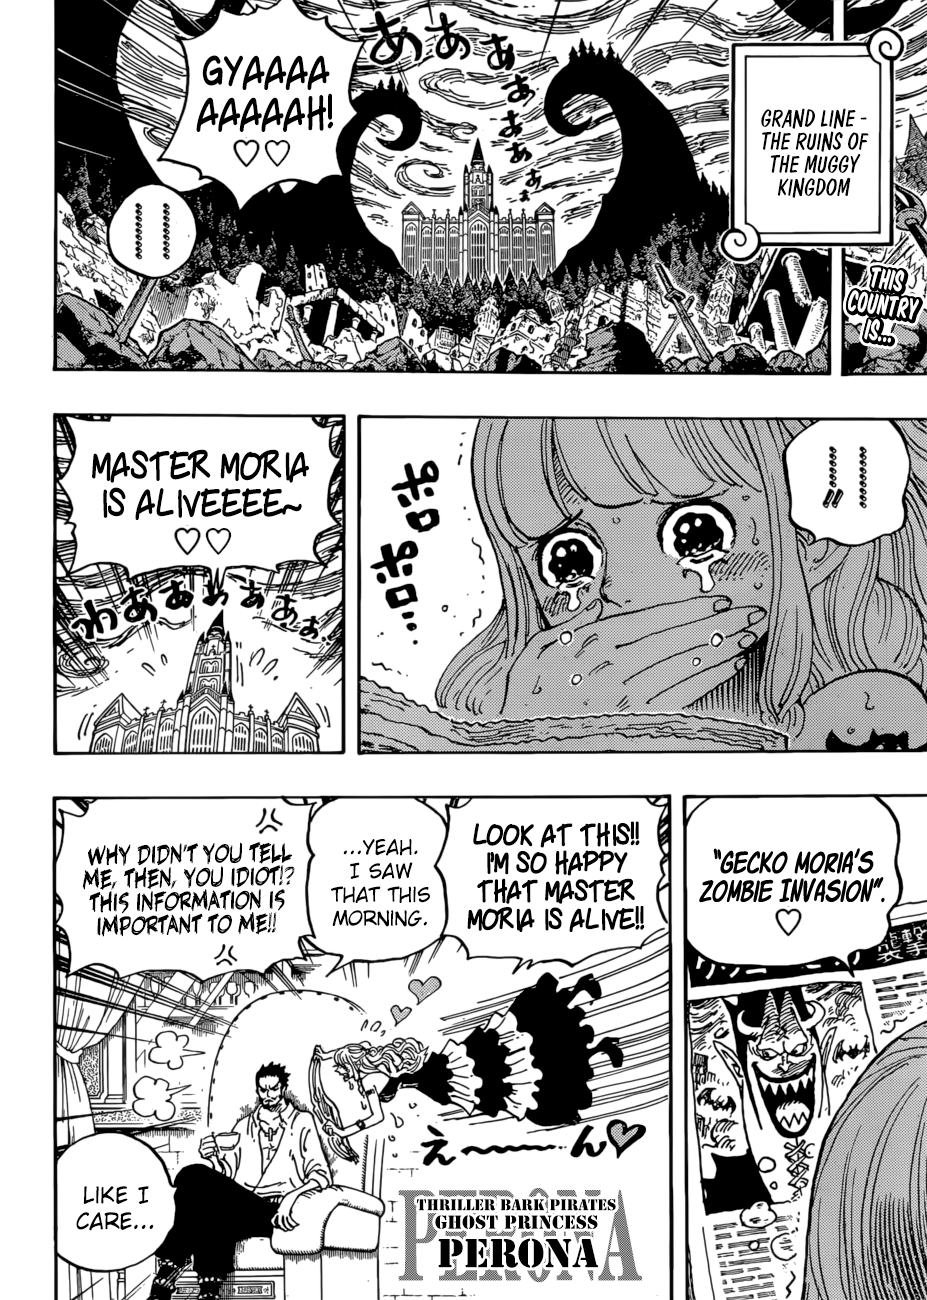 One Piece, Chapter 925 - The Blank image 03